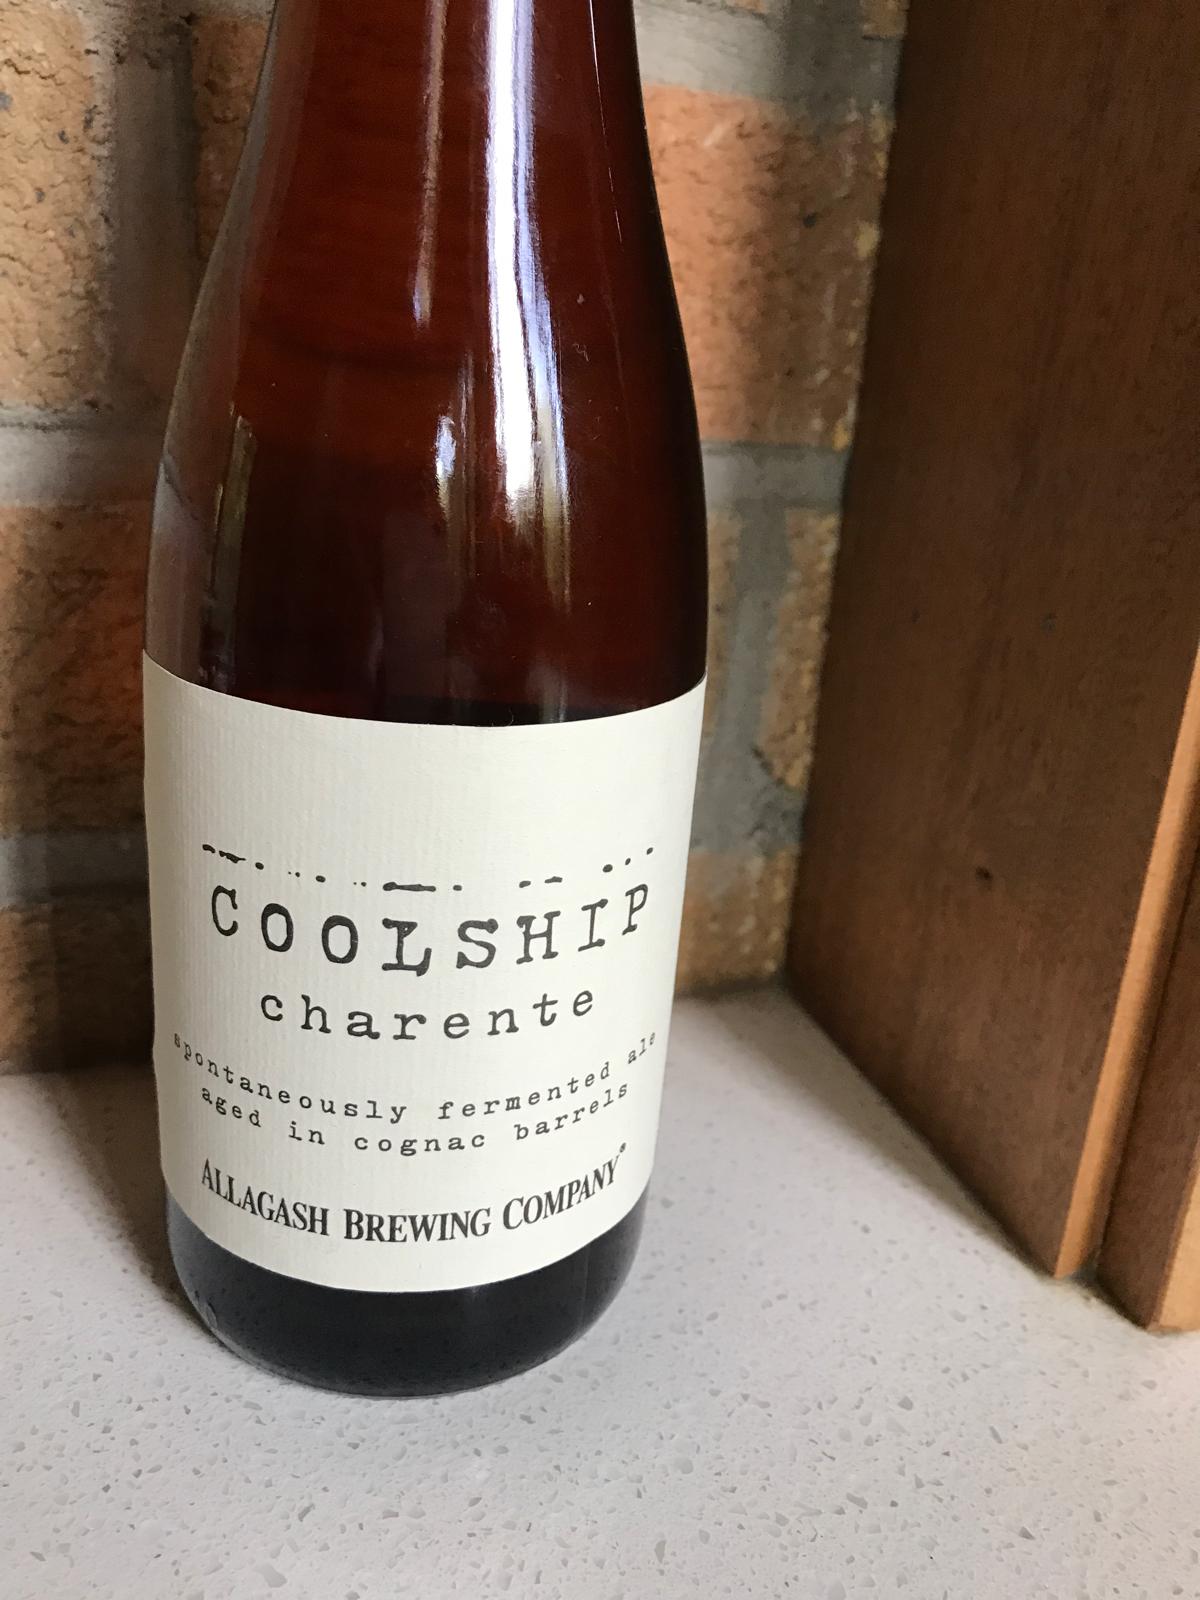 Coolship Charente